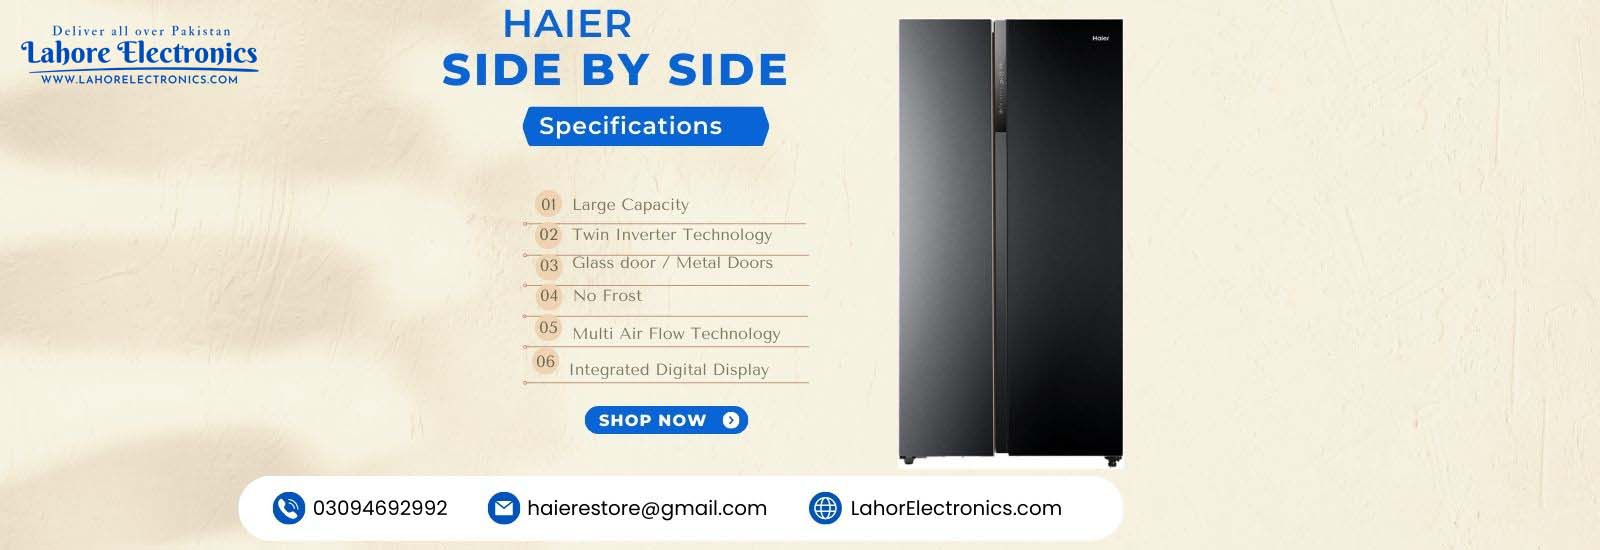 Haier Side by Side Series